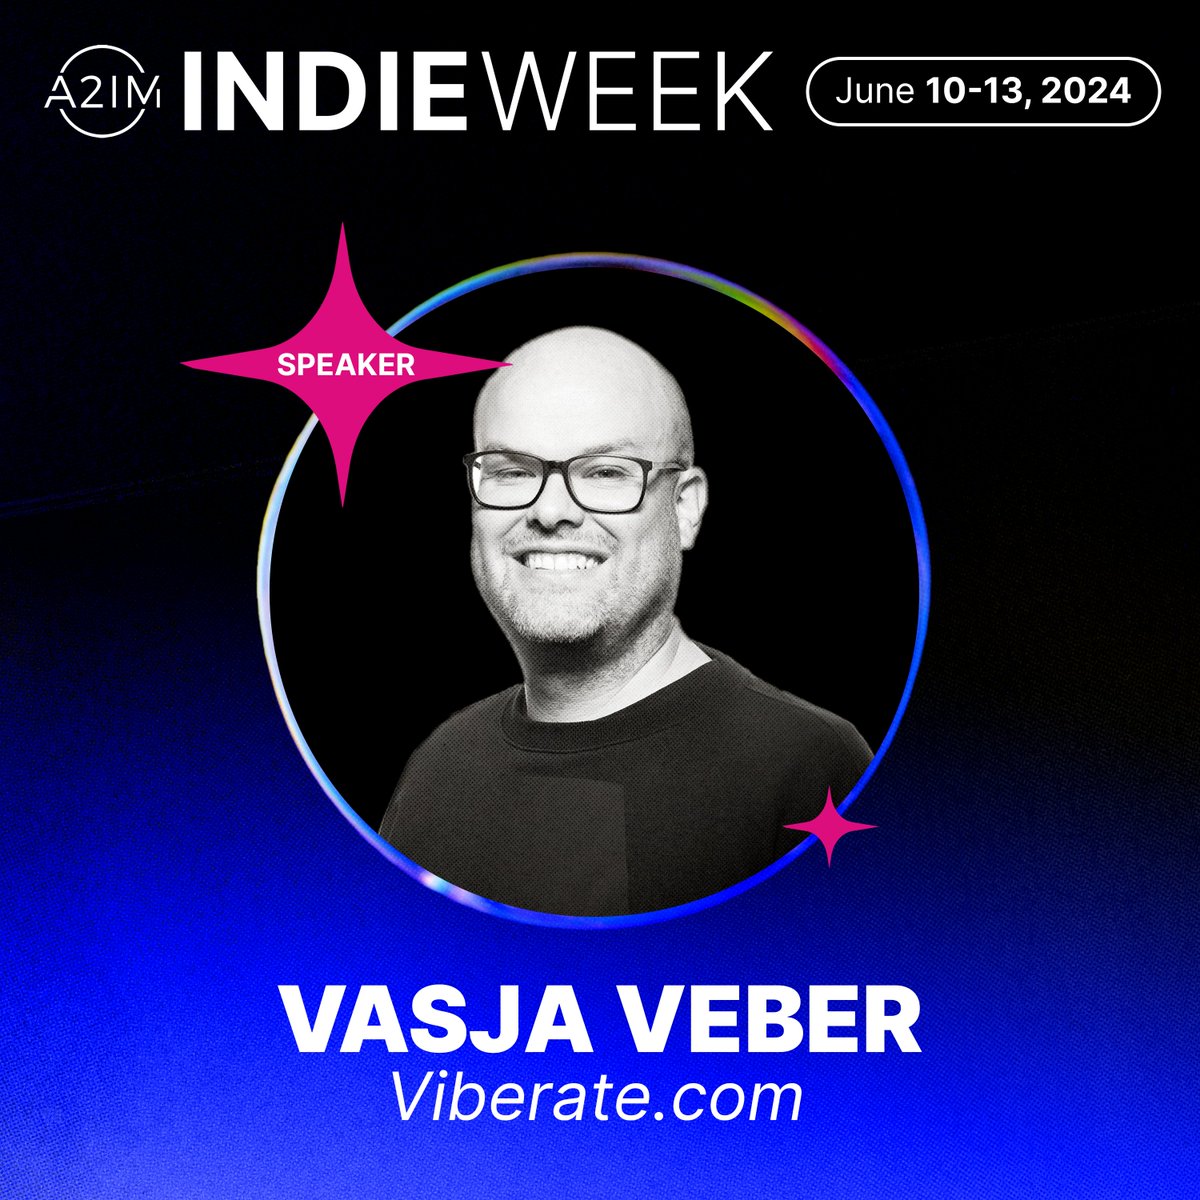 Thrilled to announce our co-founder Vasja is a featured speaker at #A2IMIndieWeek 2024! Meet him in NYC from June 10-13 to explore music analytics at the largest independent music event in the world. More info: a2imindieweek.org #A2IM #MusicBusiness